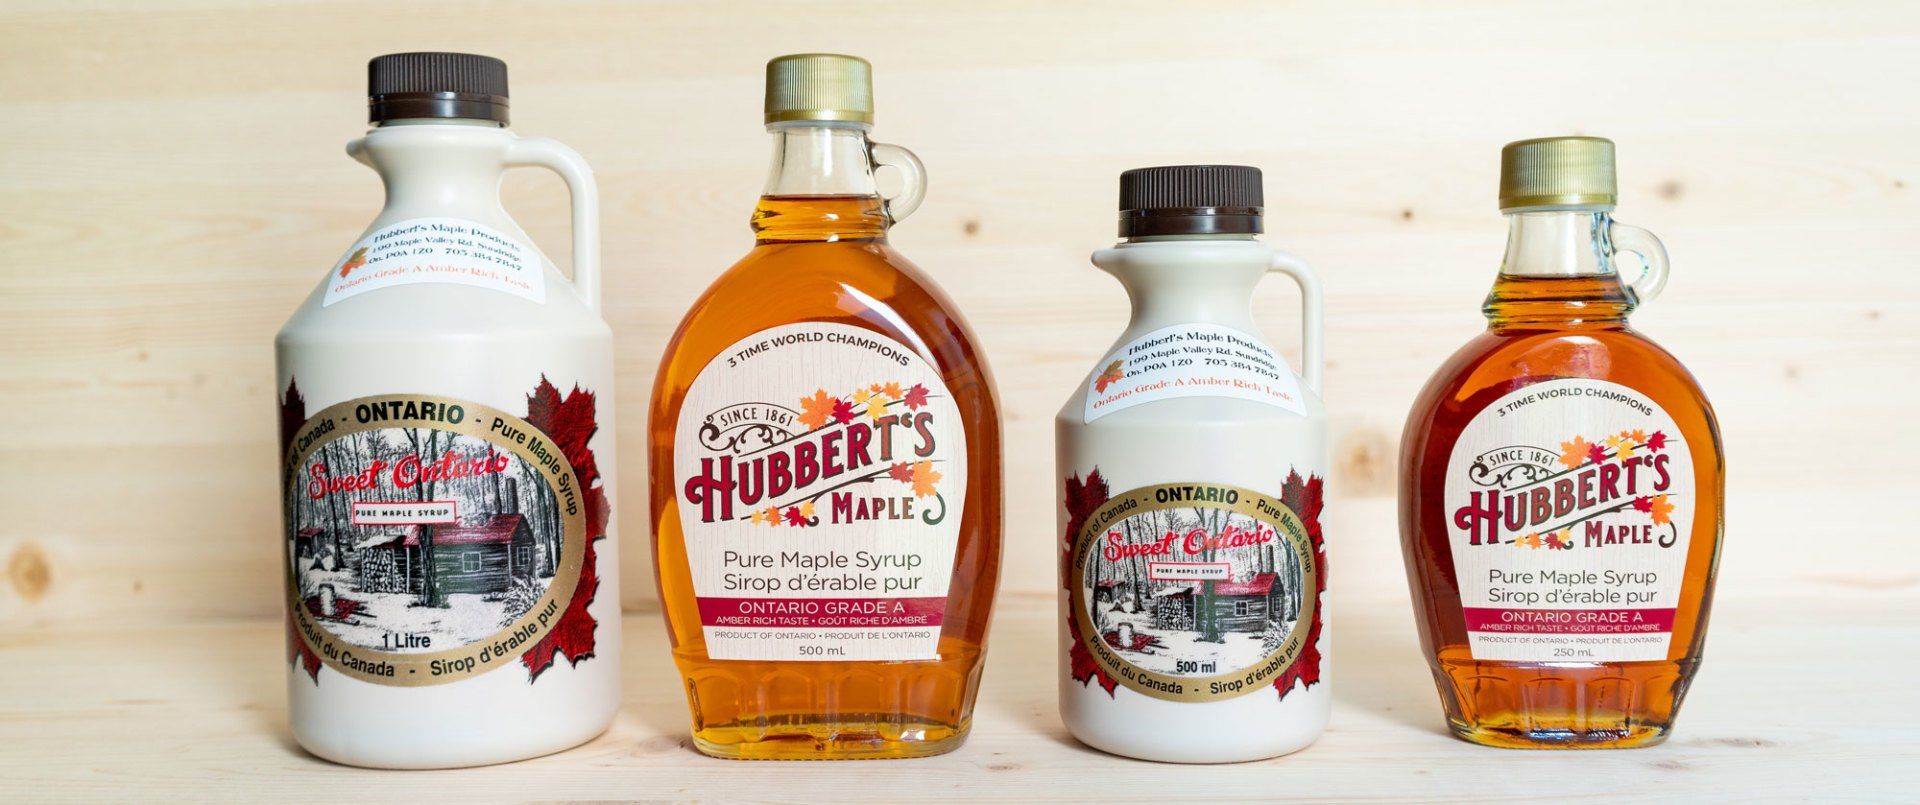 Hubbert's Maple Products